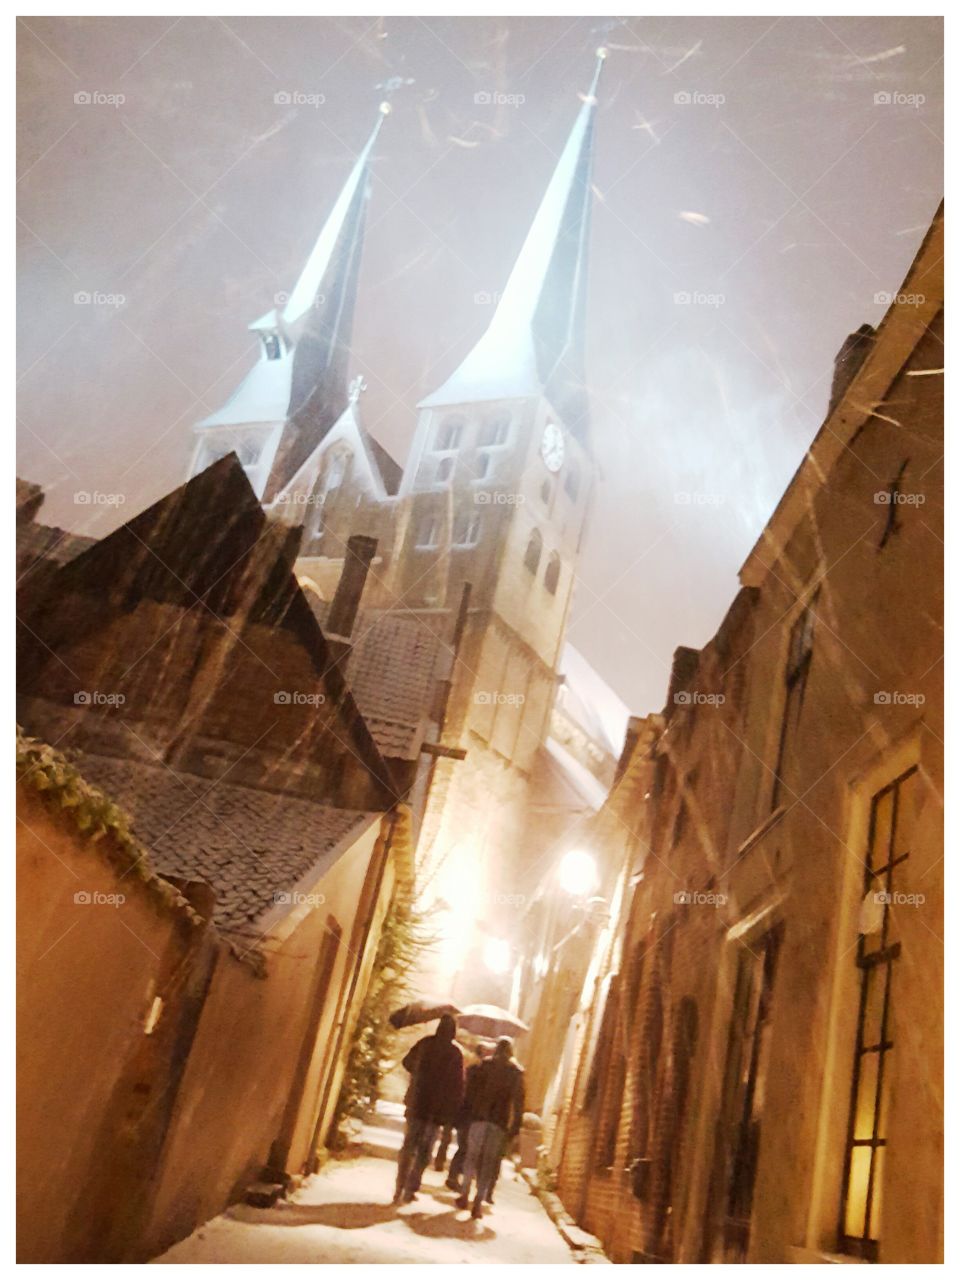 The city of Deventer covered in snow, the Netherlands. It was like a fairytale!